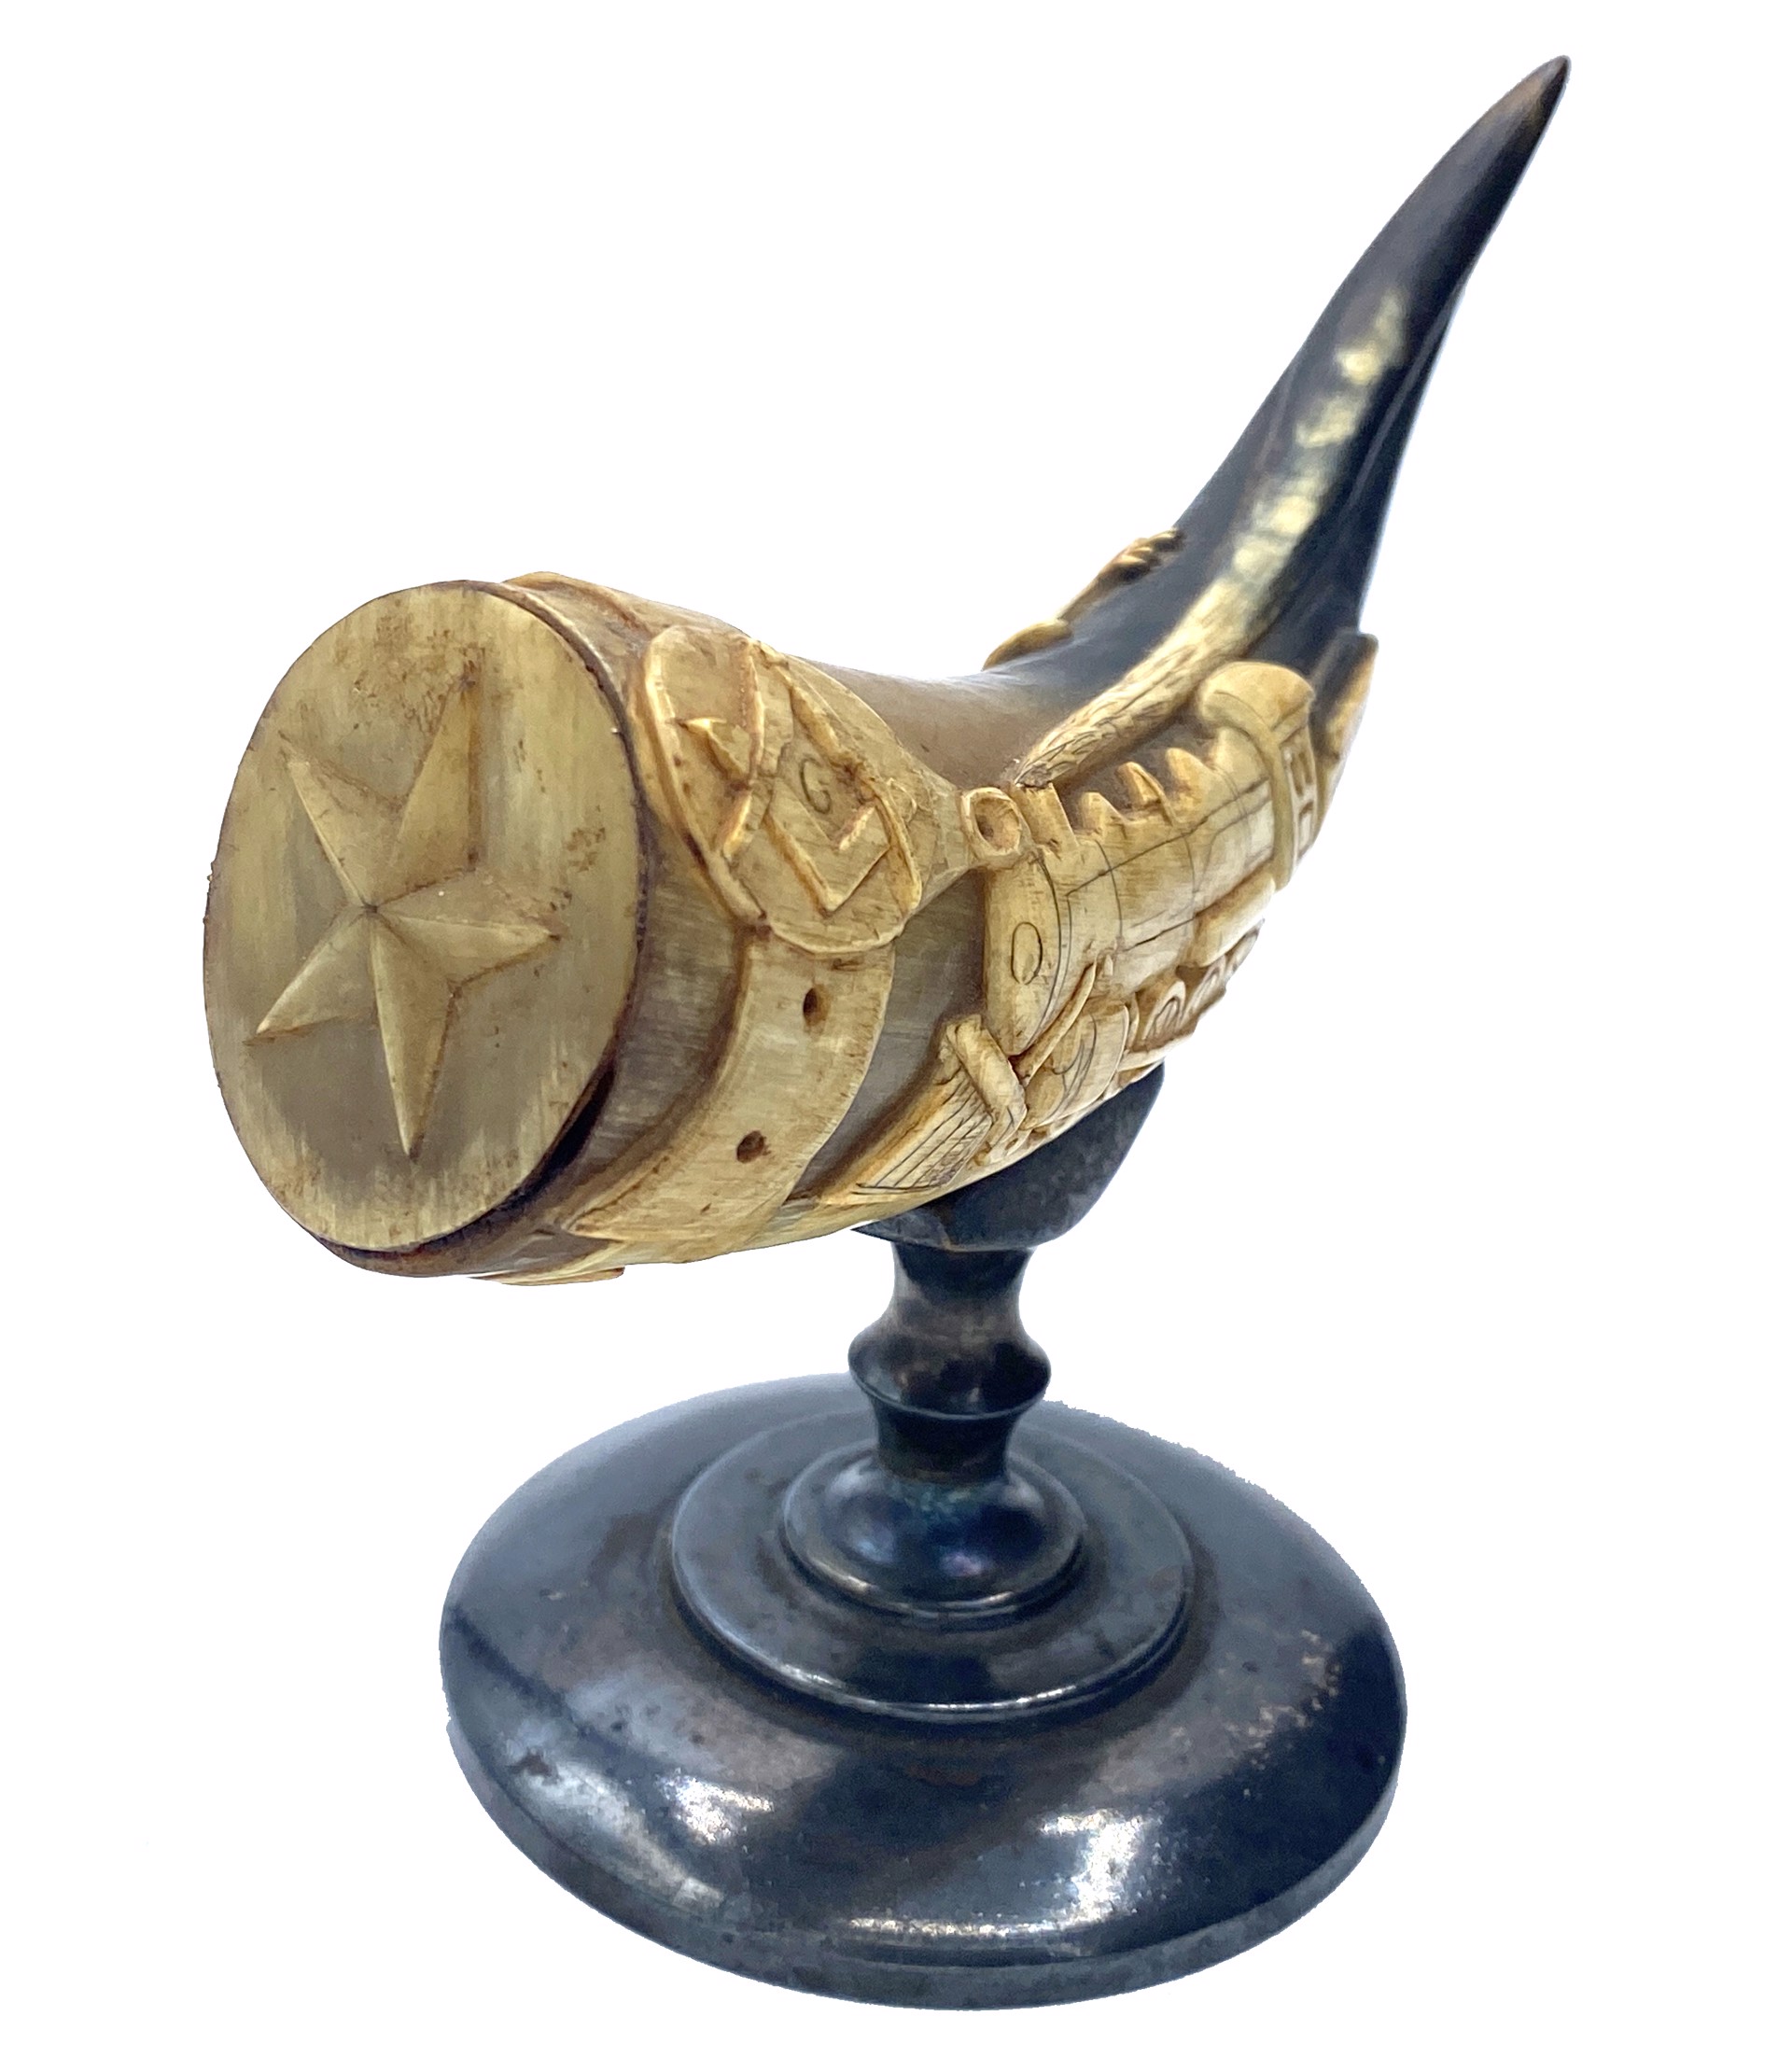 DS-79: small carved powder horn on silver plate stand - WD Sutherland, hunting scene, locomotive, masonic buckle with emblem, star enclosure by Dan Super